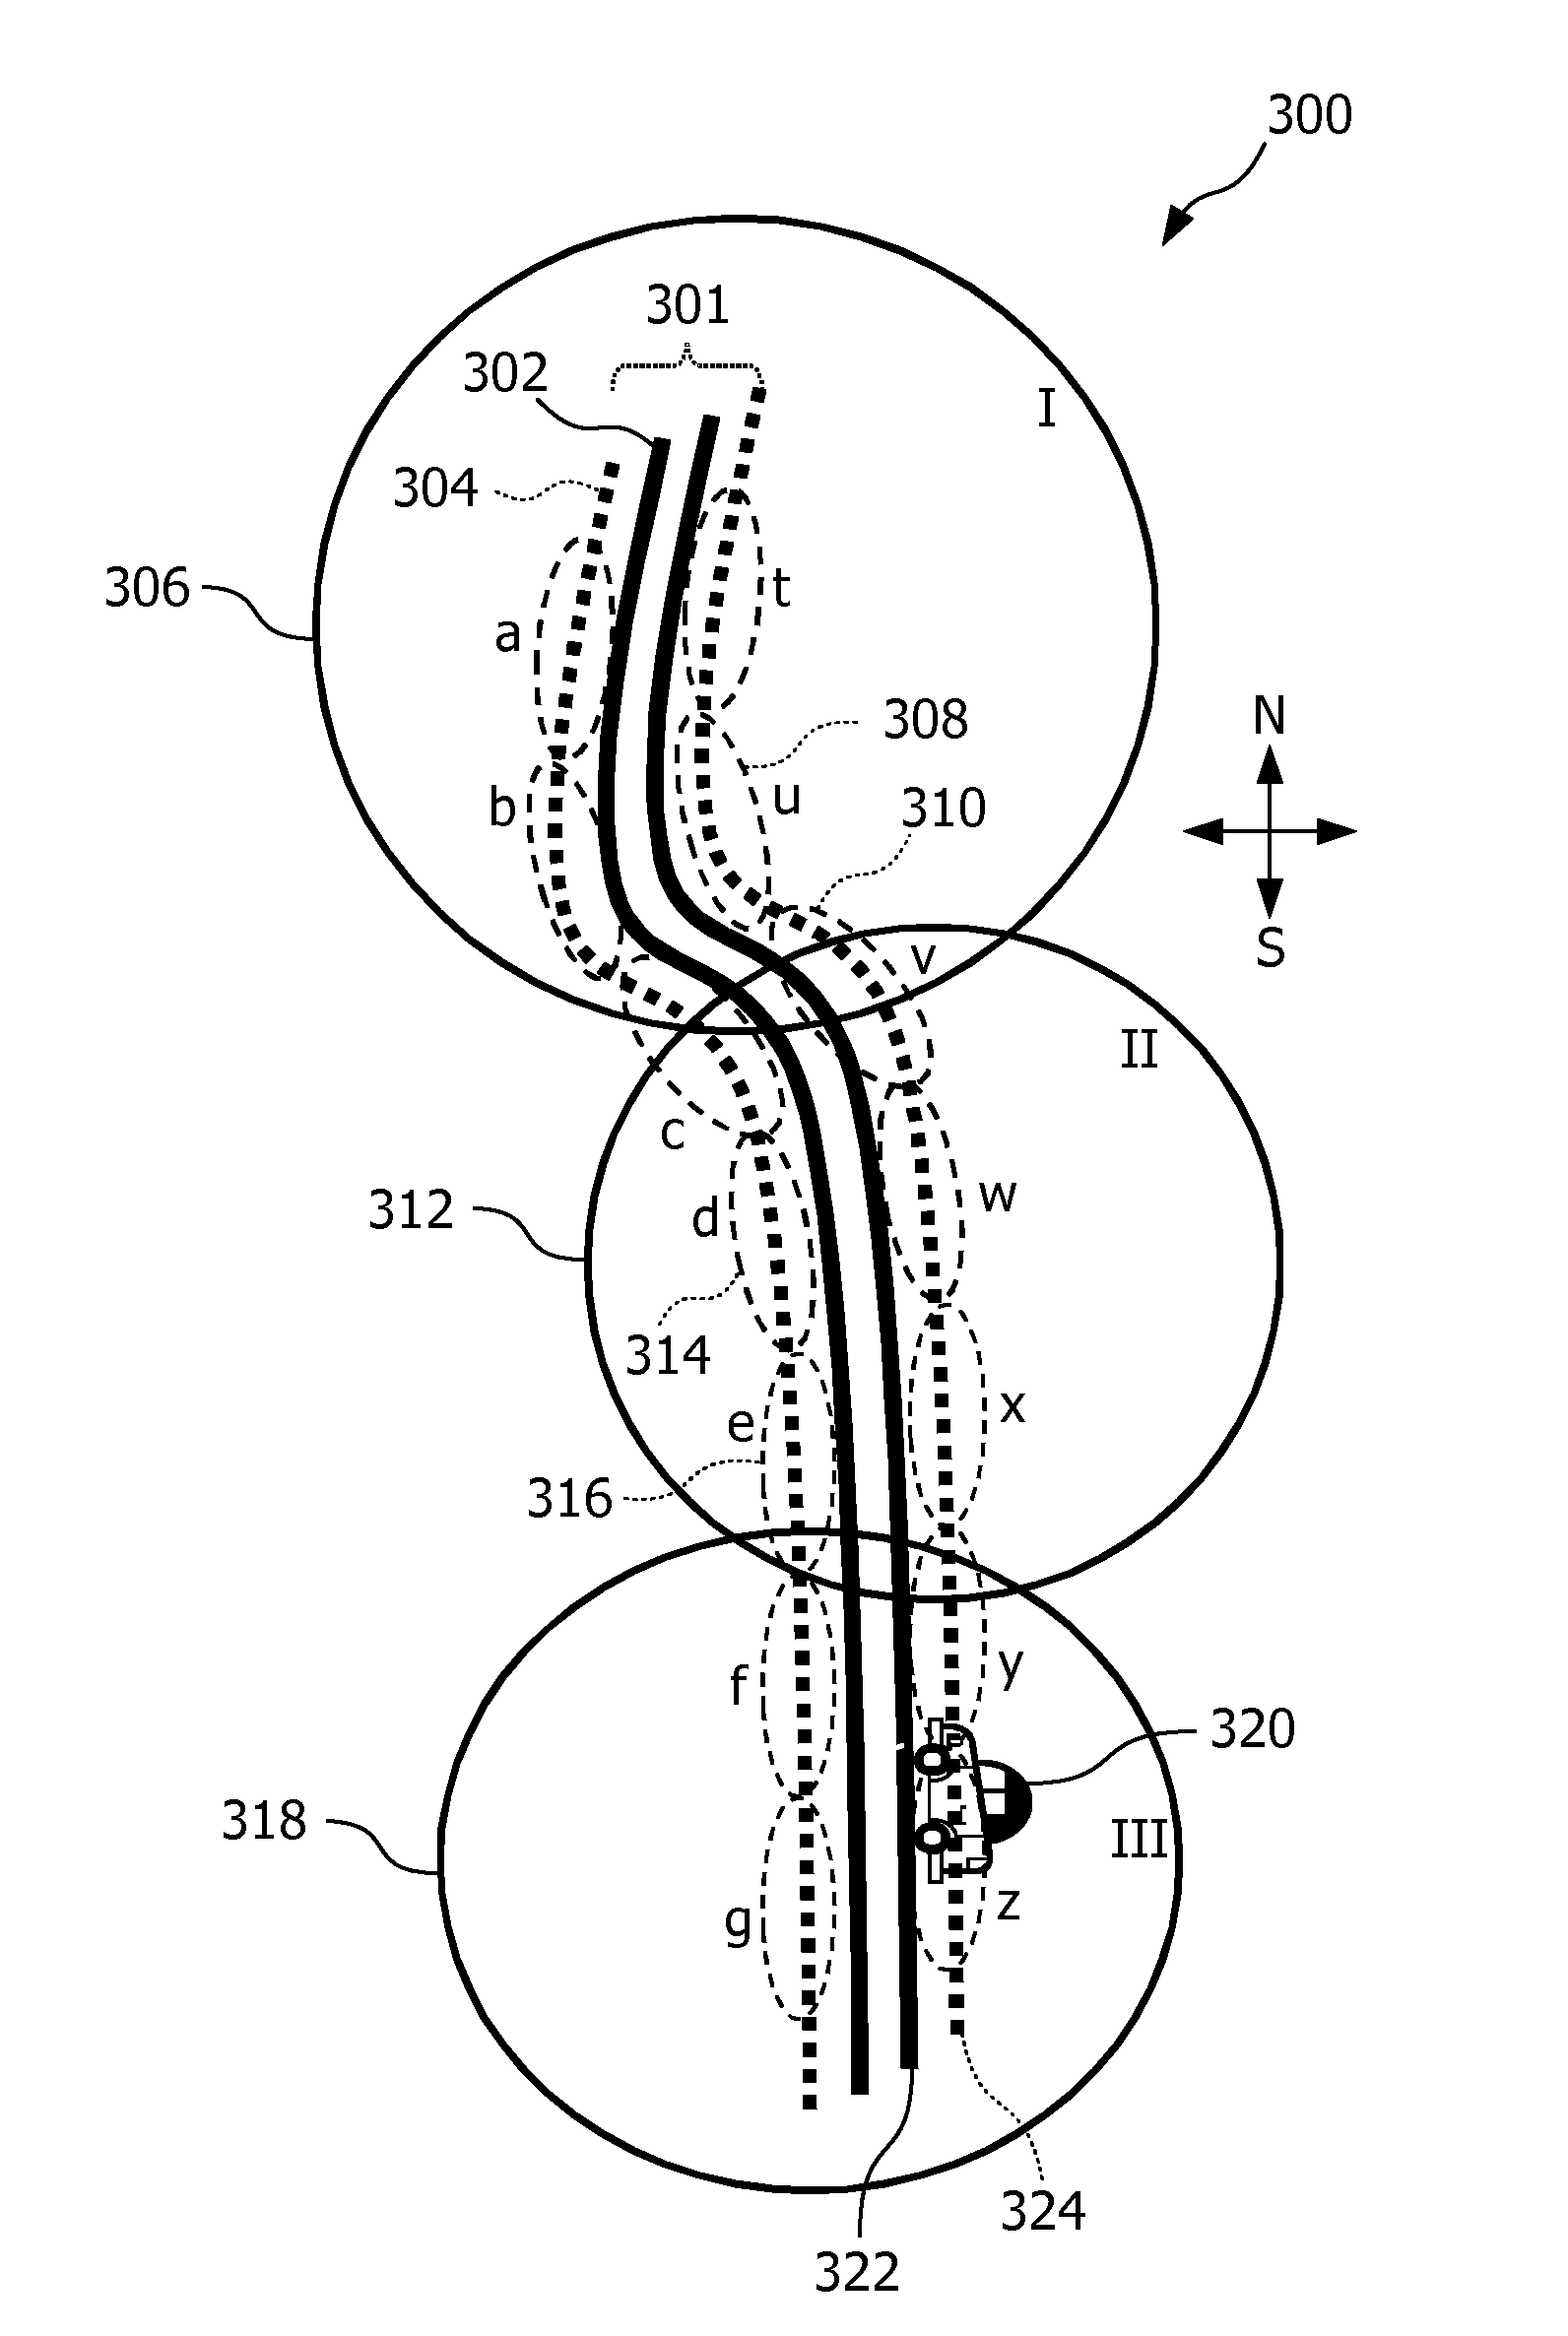 Method of controlling an outdoor lighting system, a computer program product, a controlling device and an outdoor lighting system